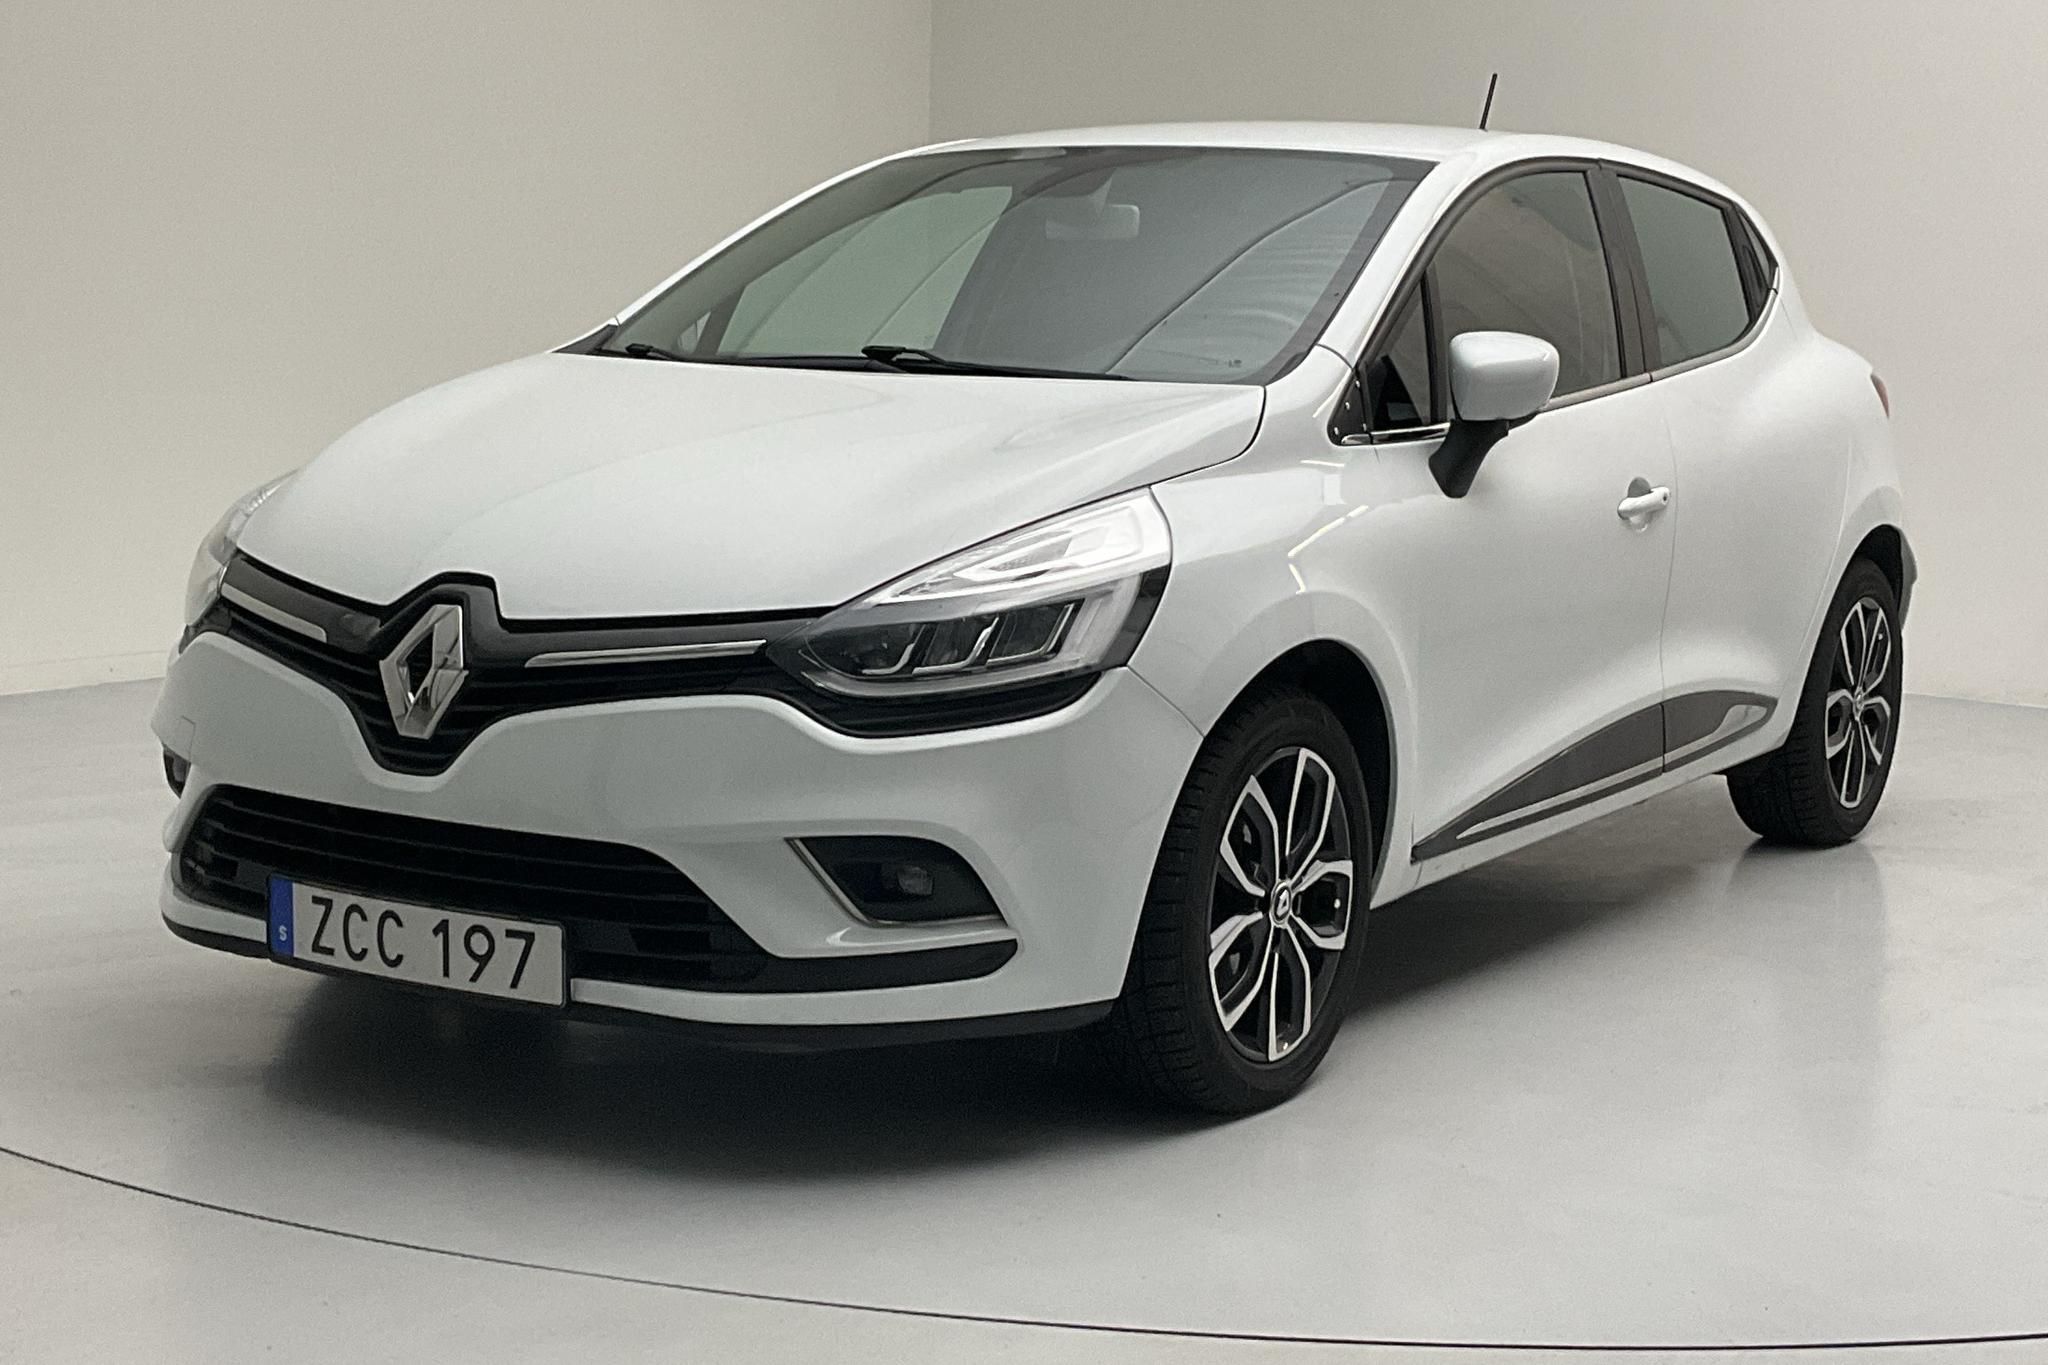 Renault Clio IV 1.2 TCe 120 5dr (120hk) - 43 790 km - Automatic - white - 2018